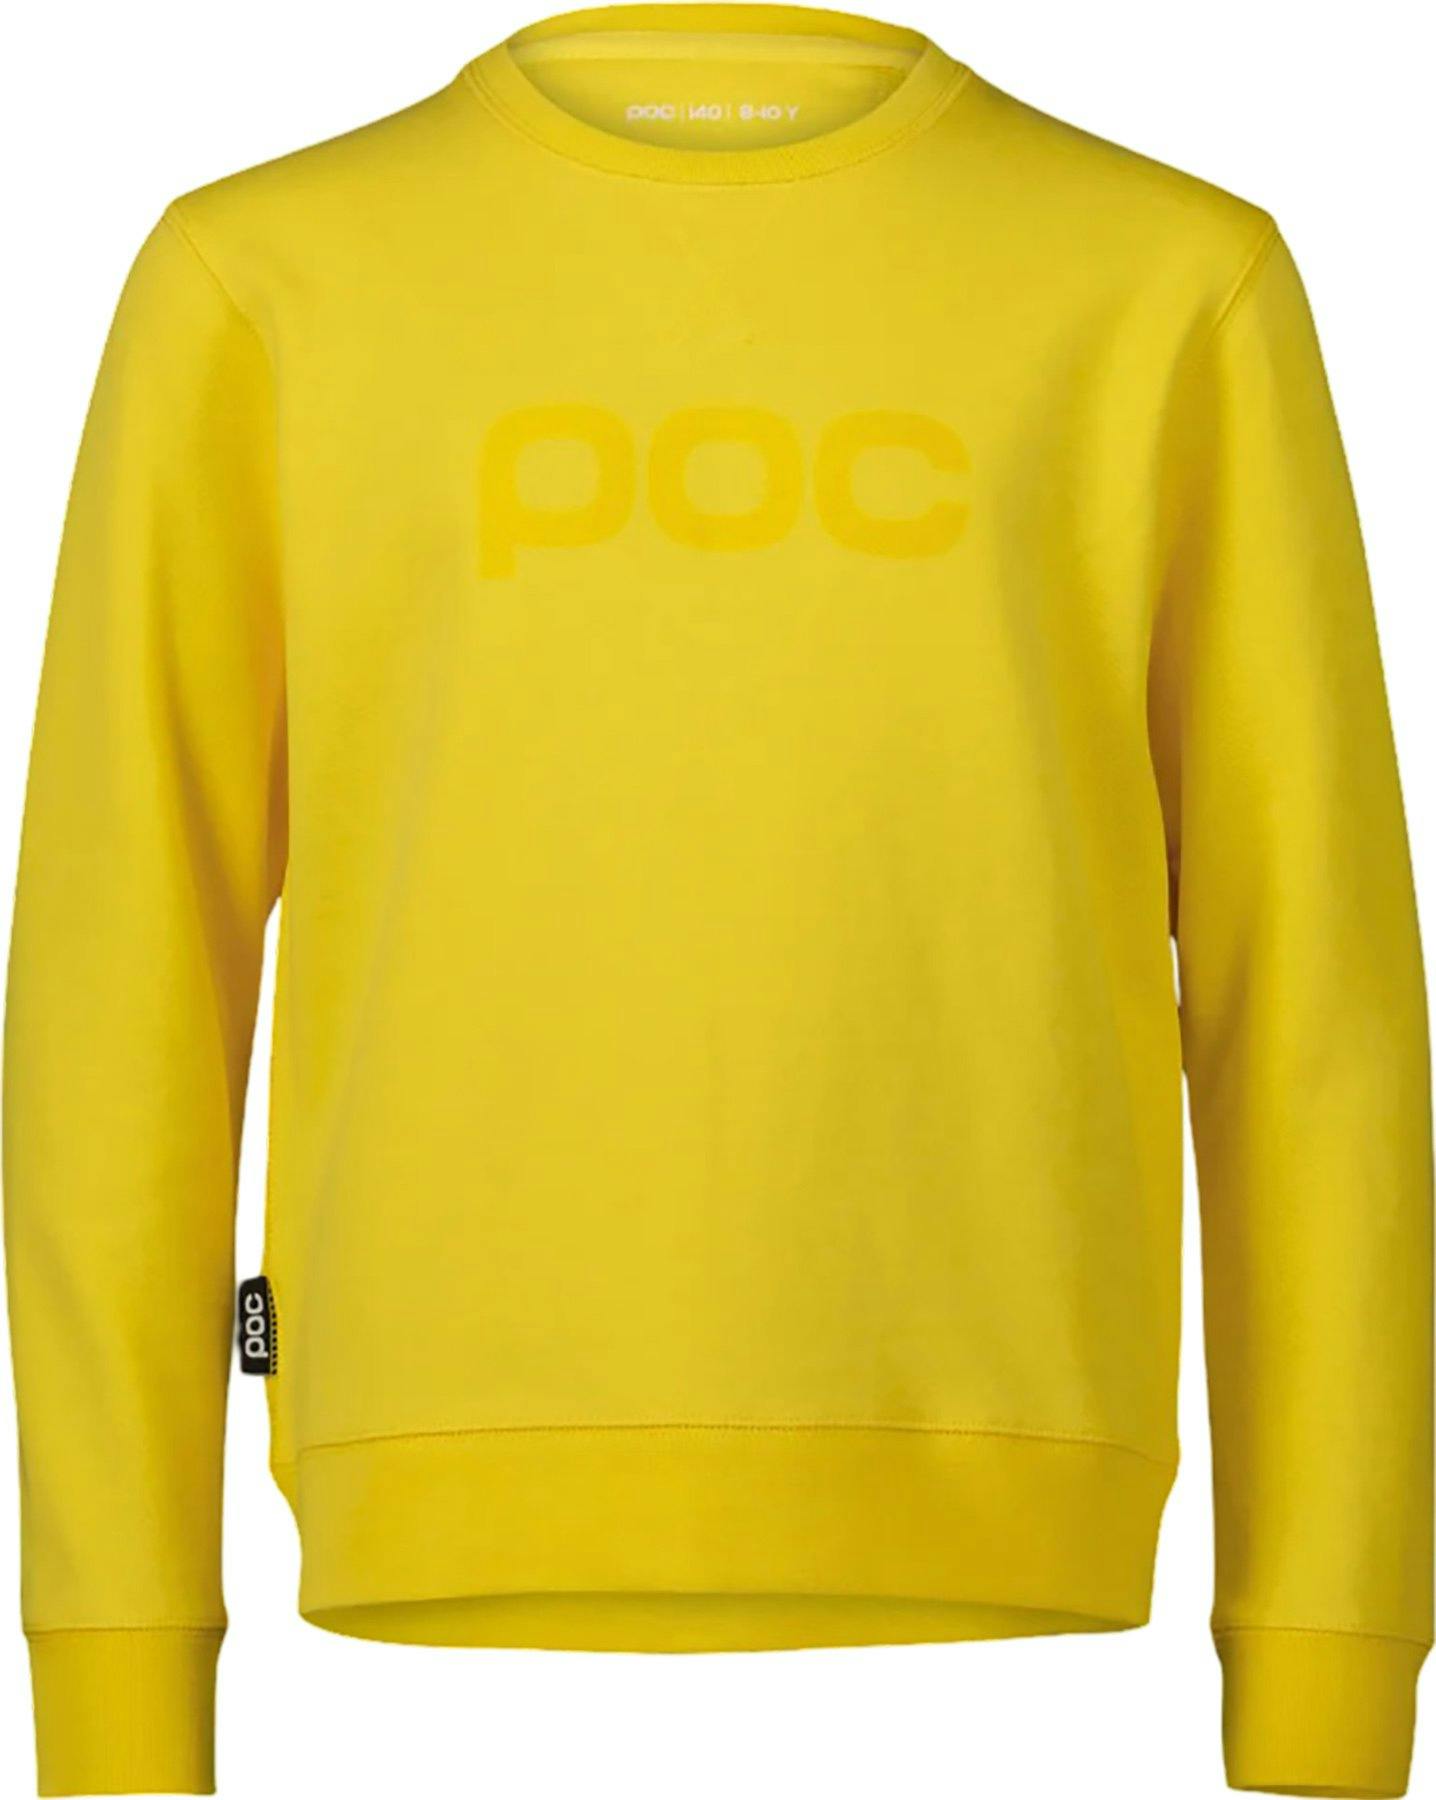 Product image for POC Logo Crew Neck Sweater - Youth